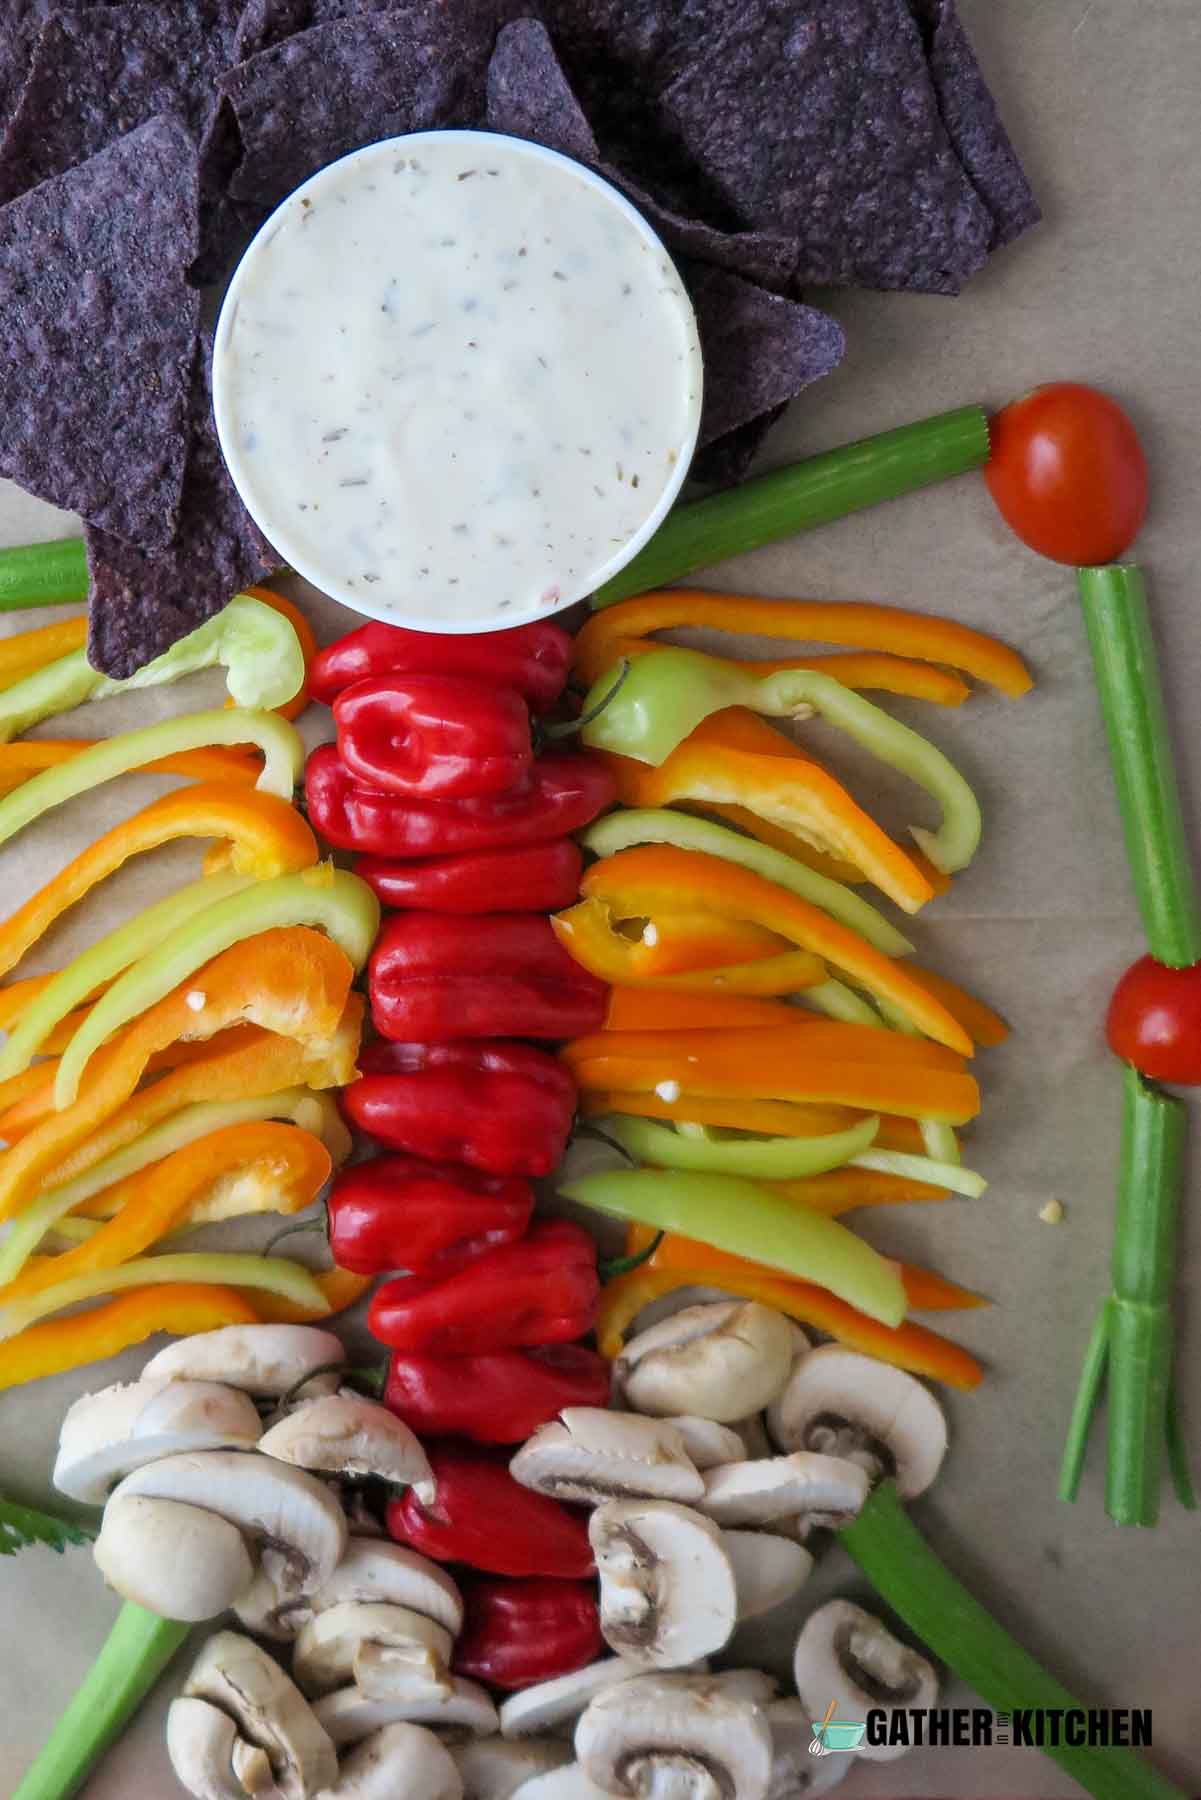 Chips, bell peppers, mushrooms and veggie bowl arranged to form a skeleton.